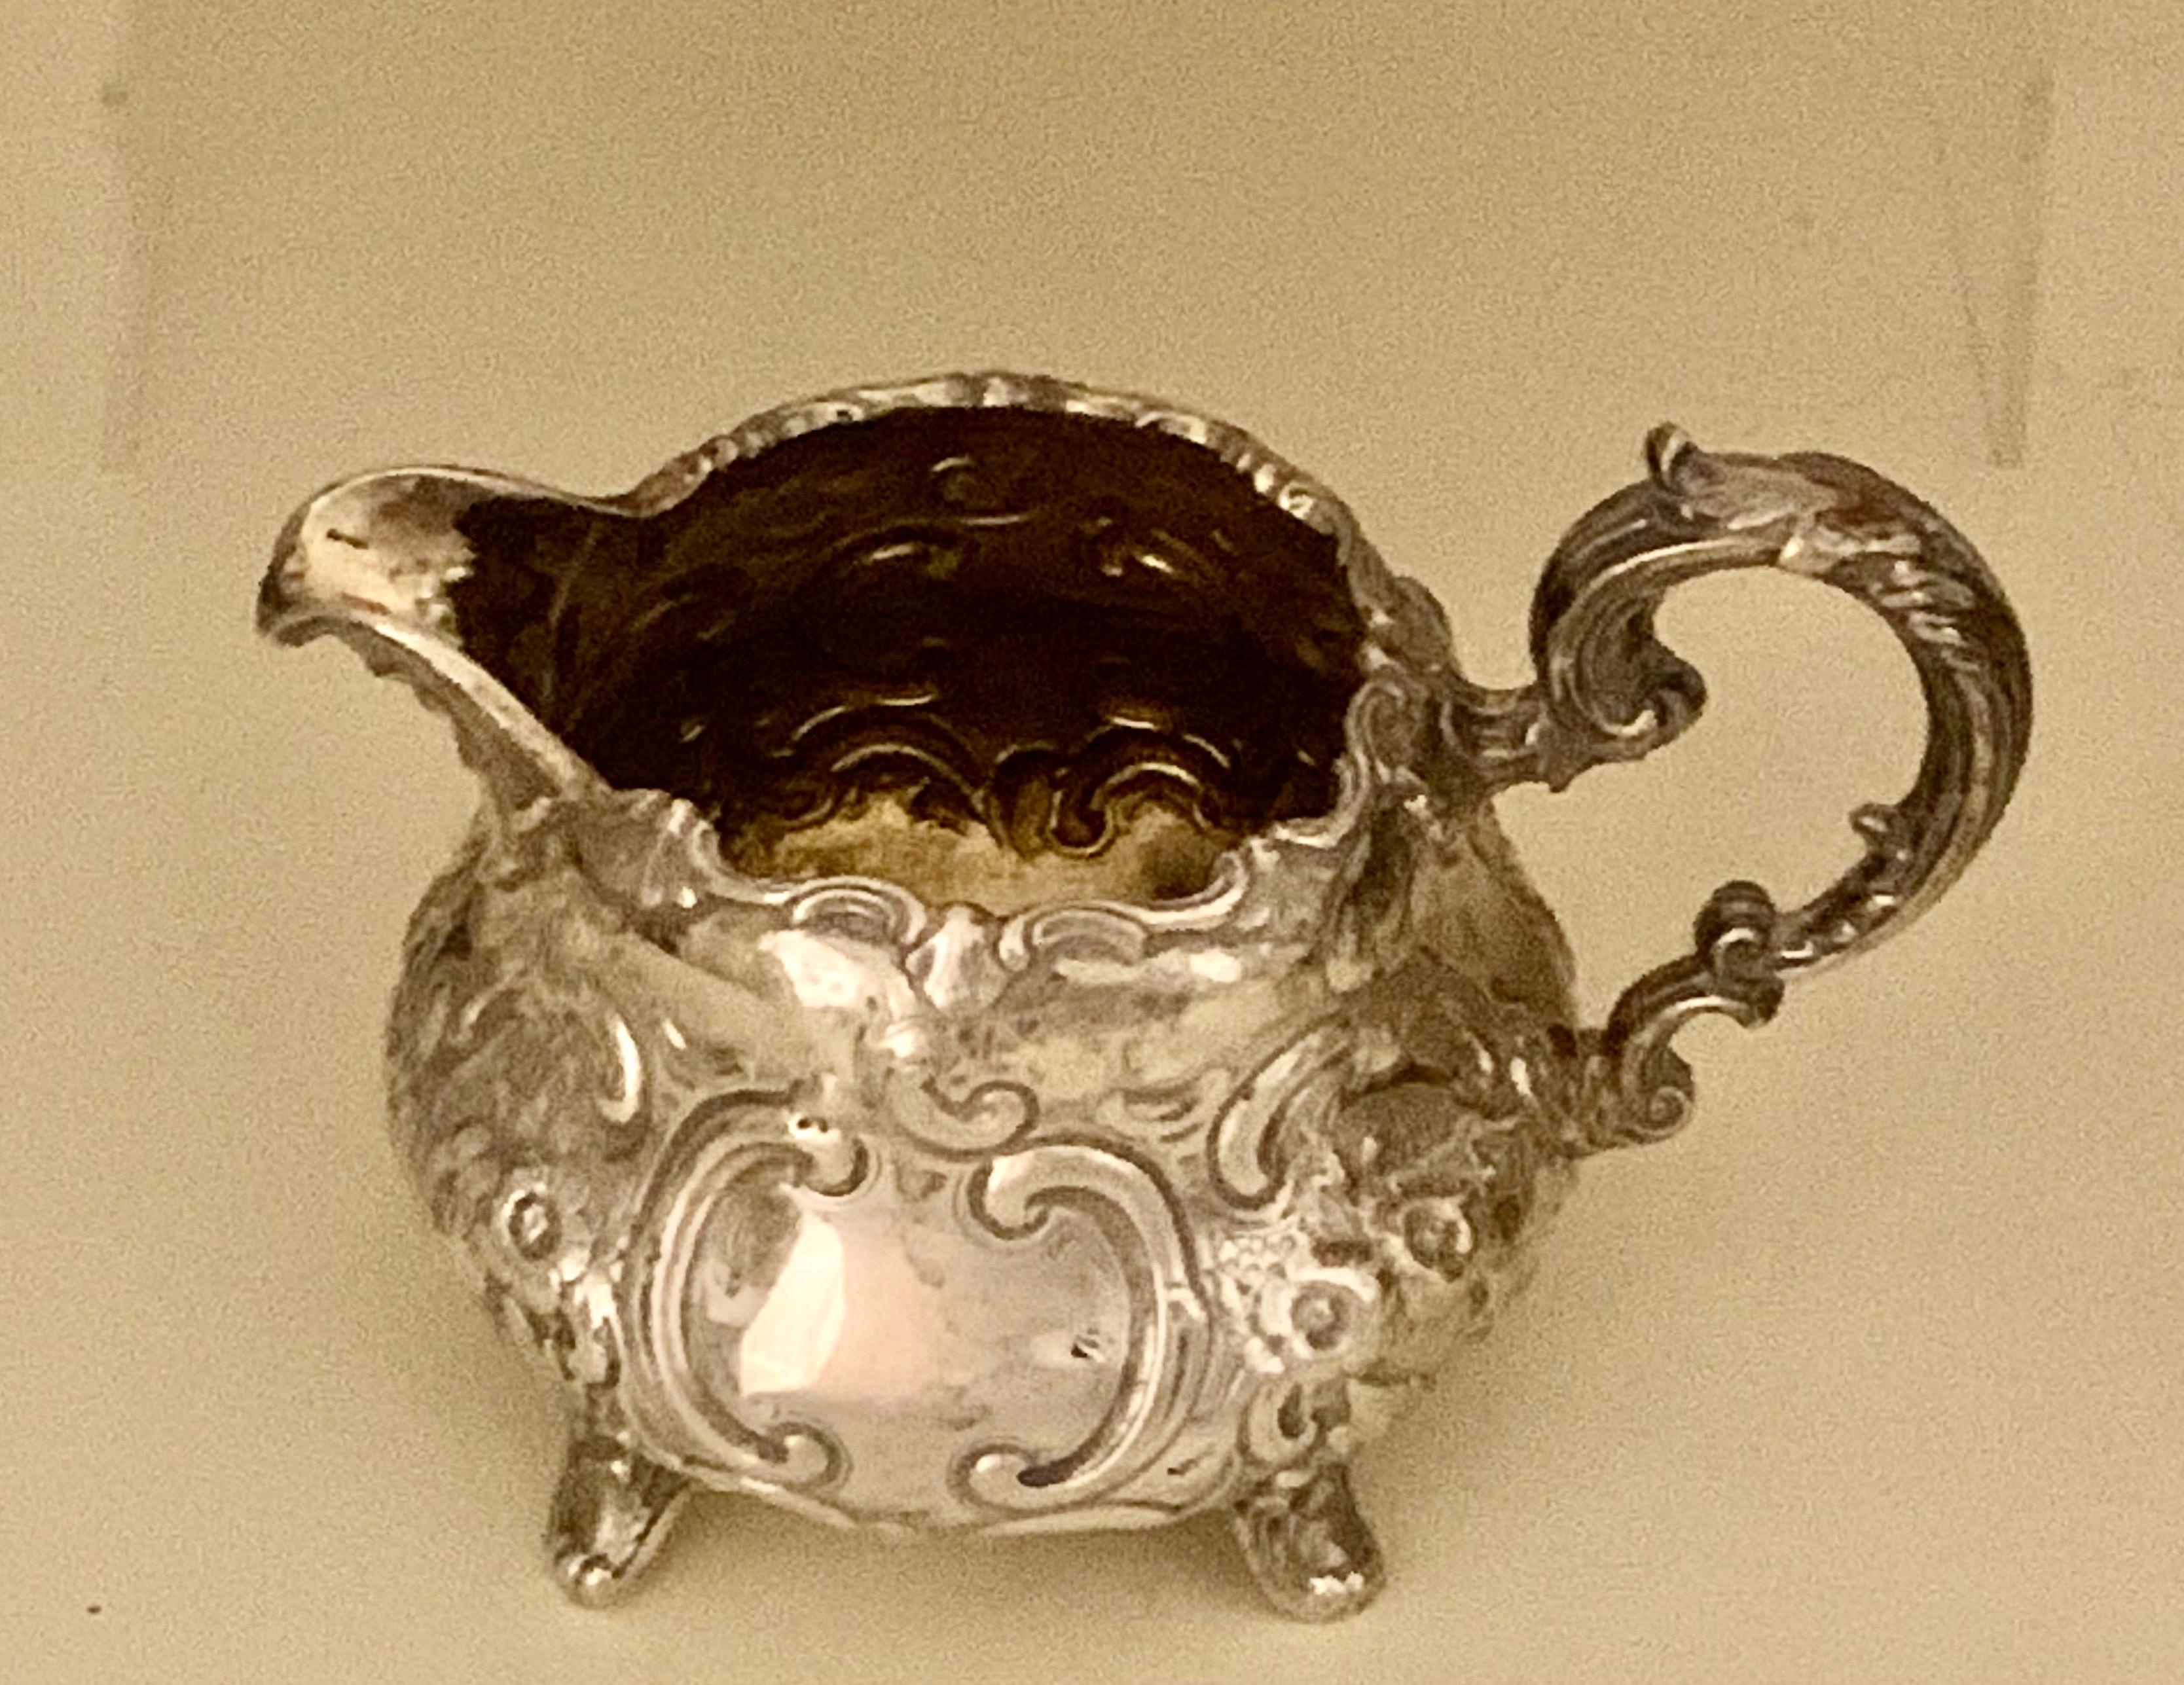 19th Century Victorian Sterling Silver Tea and Coffee Service by william Smiley, London, 1860